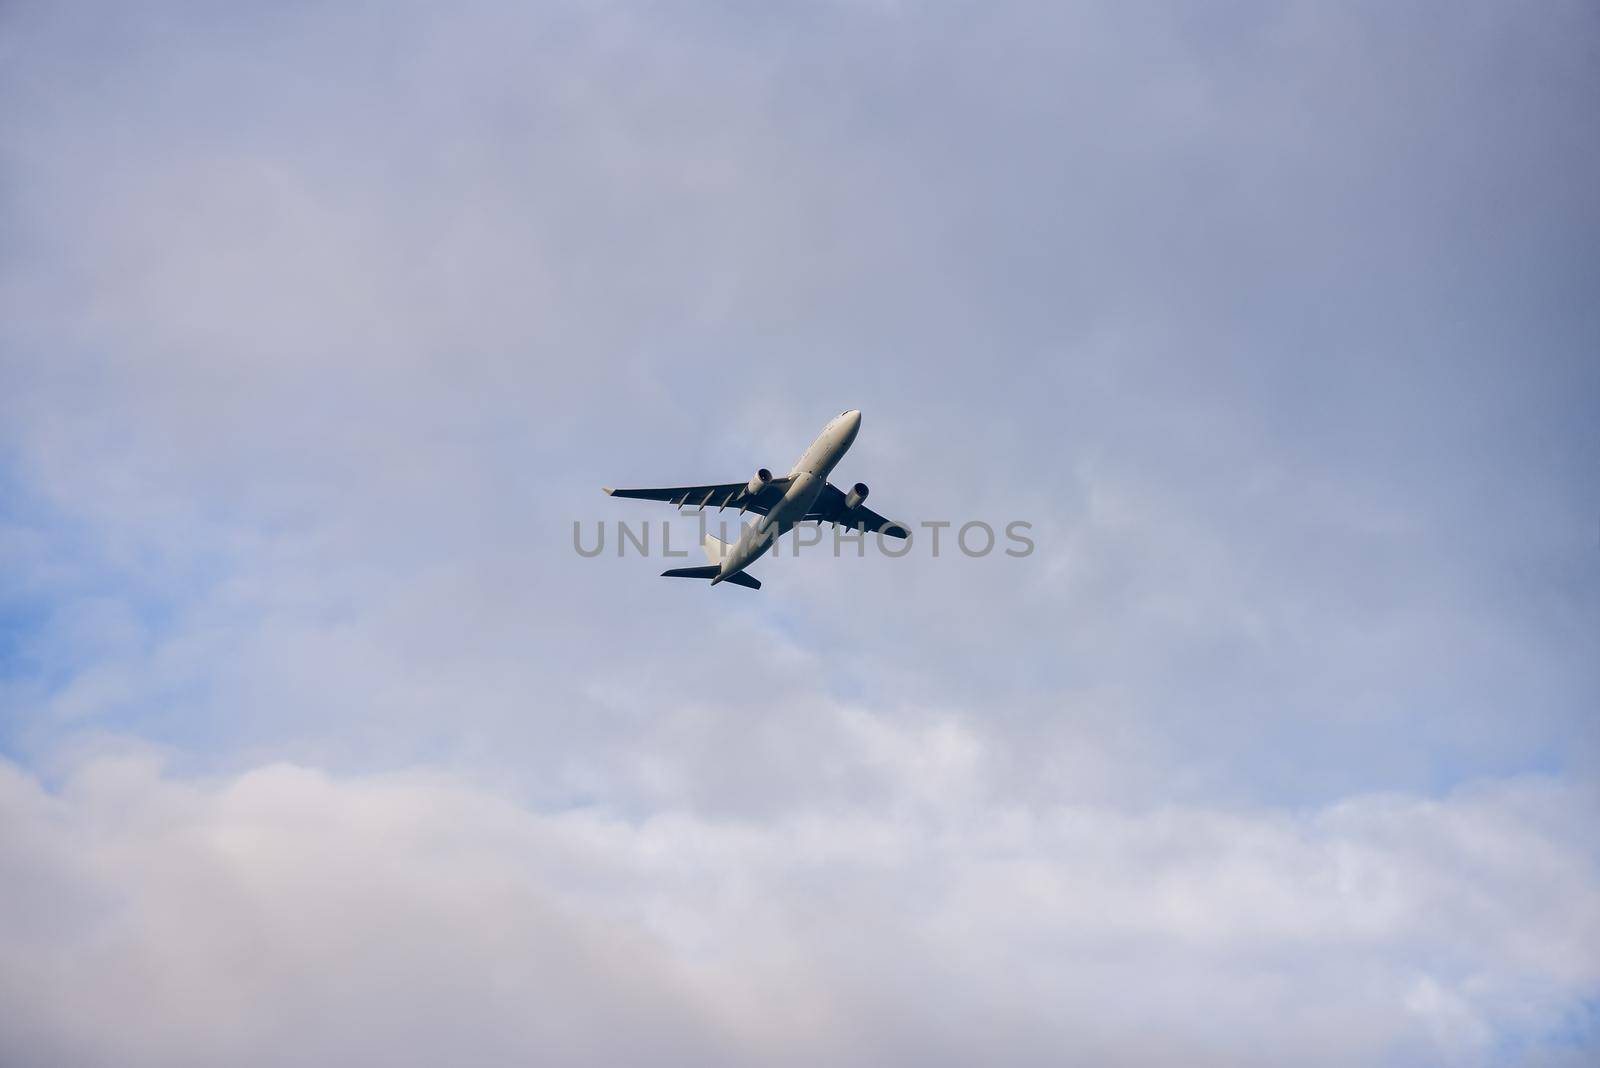 Passenger airplane flying against the cloudy sky.